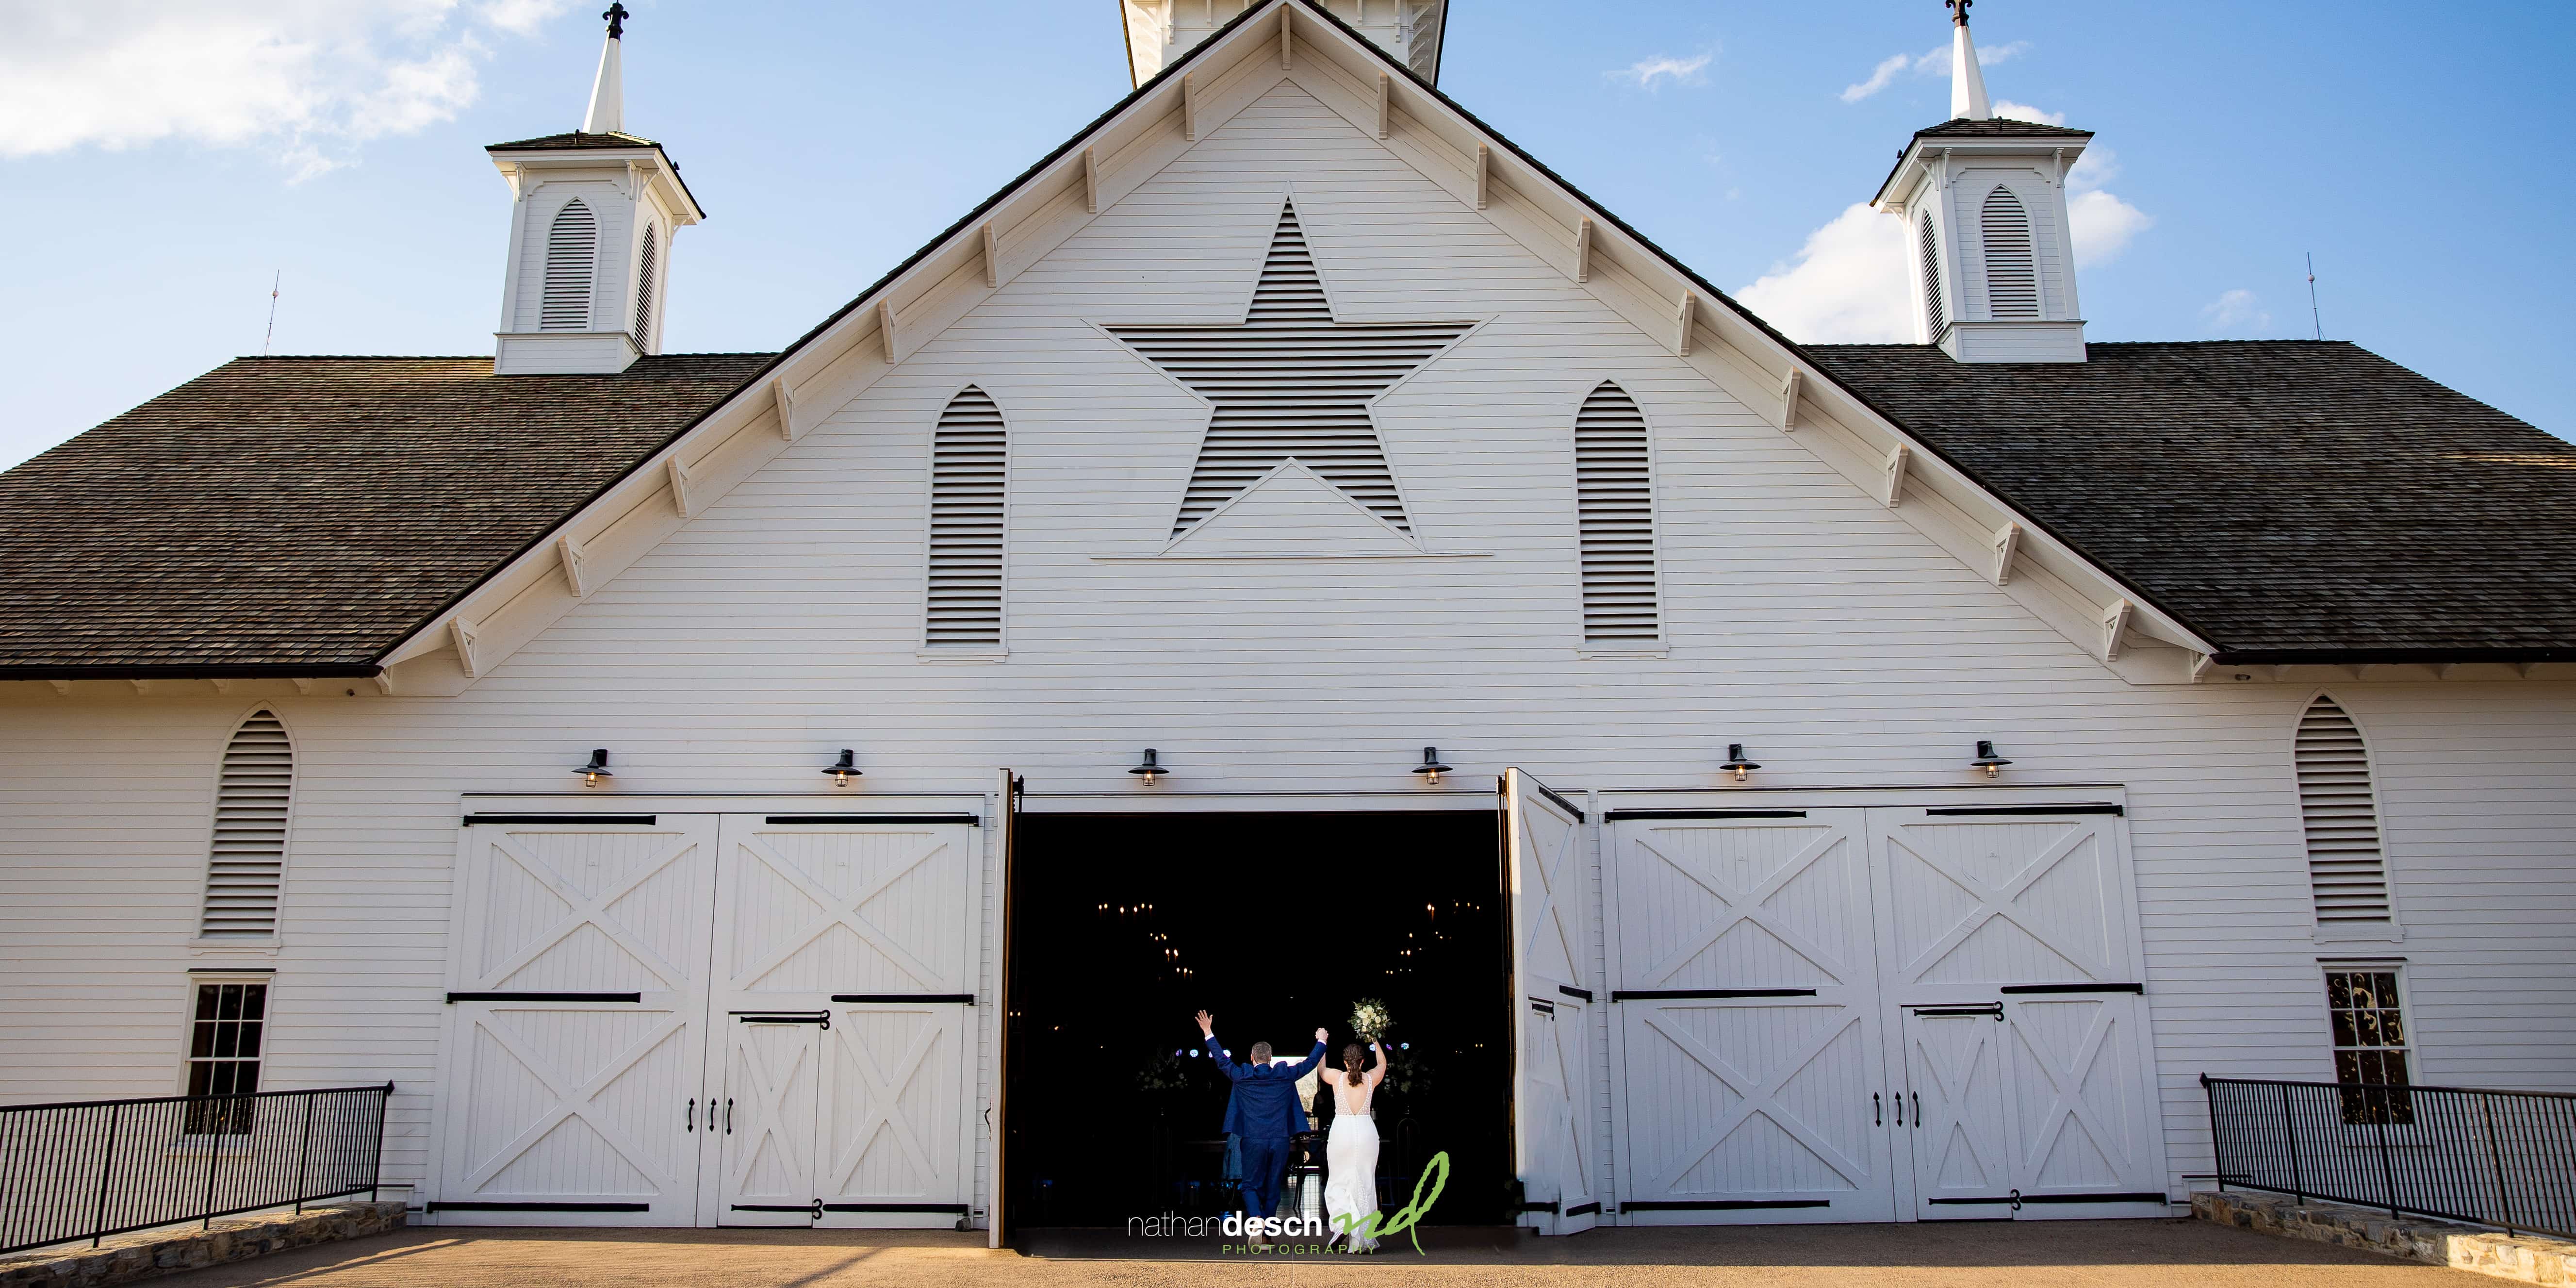 entrance to the star barn